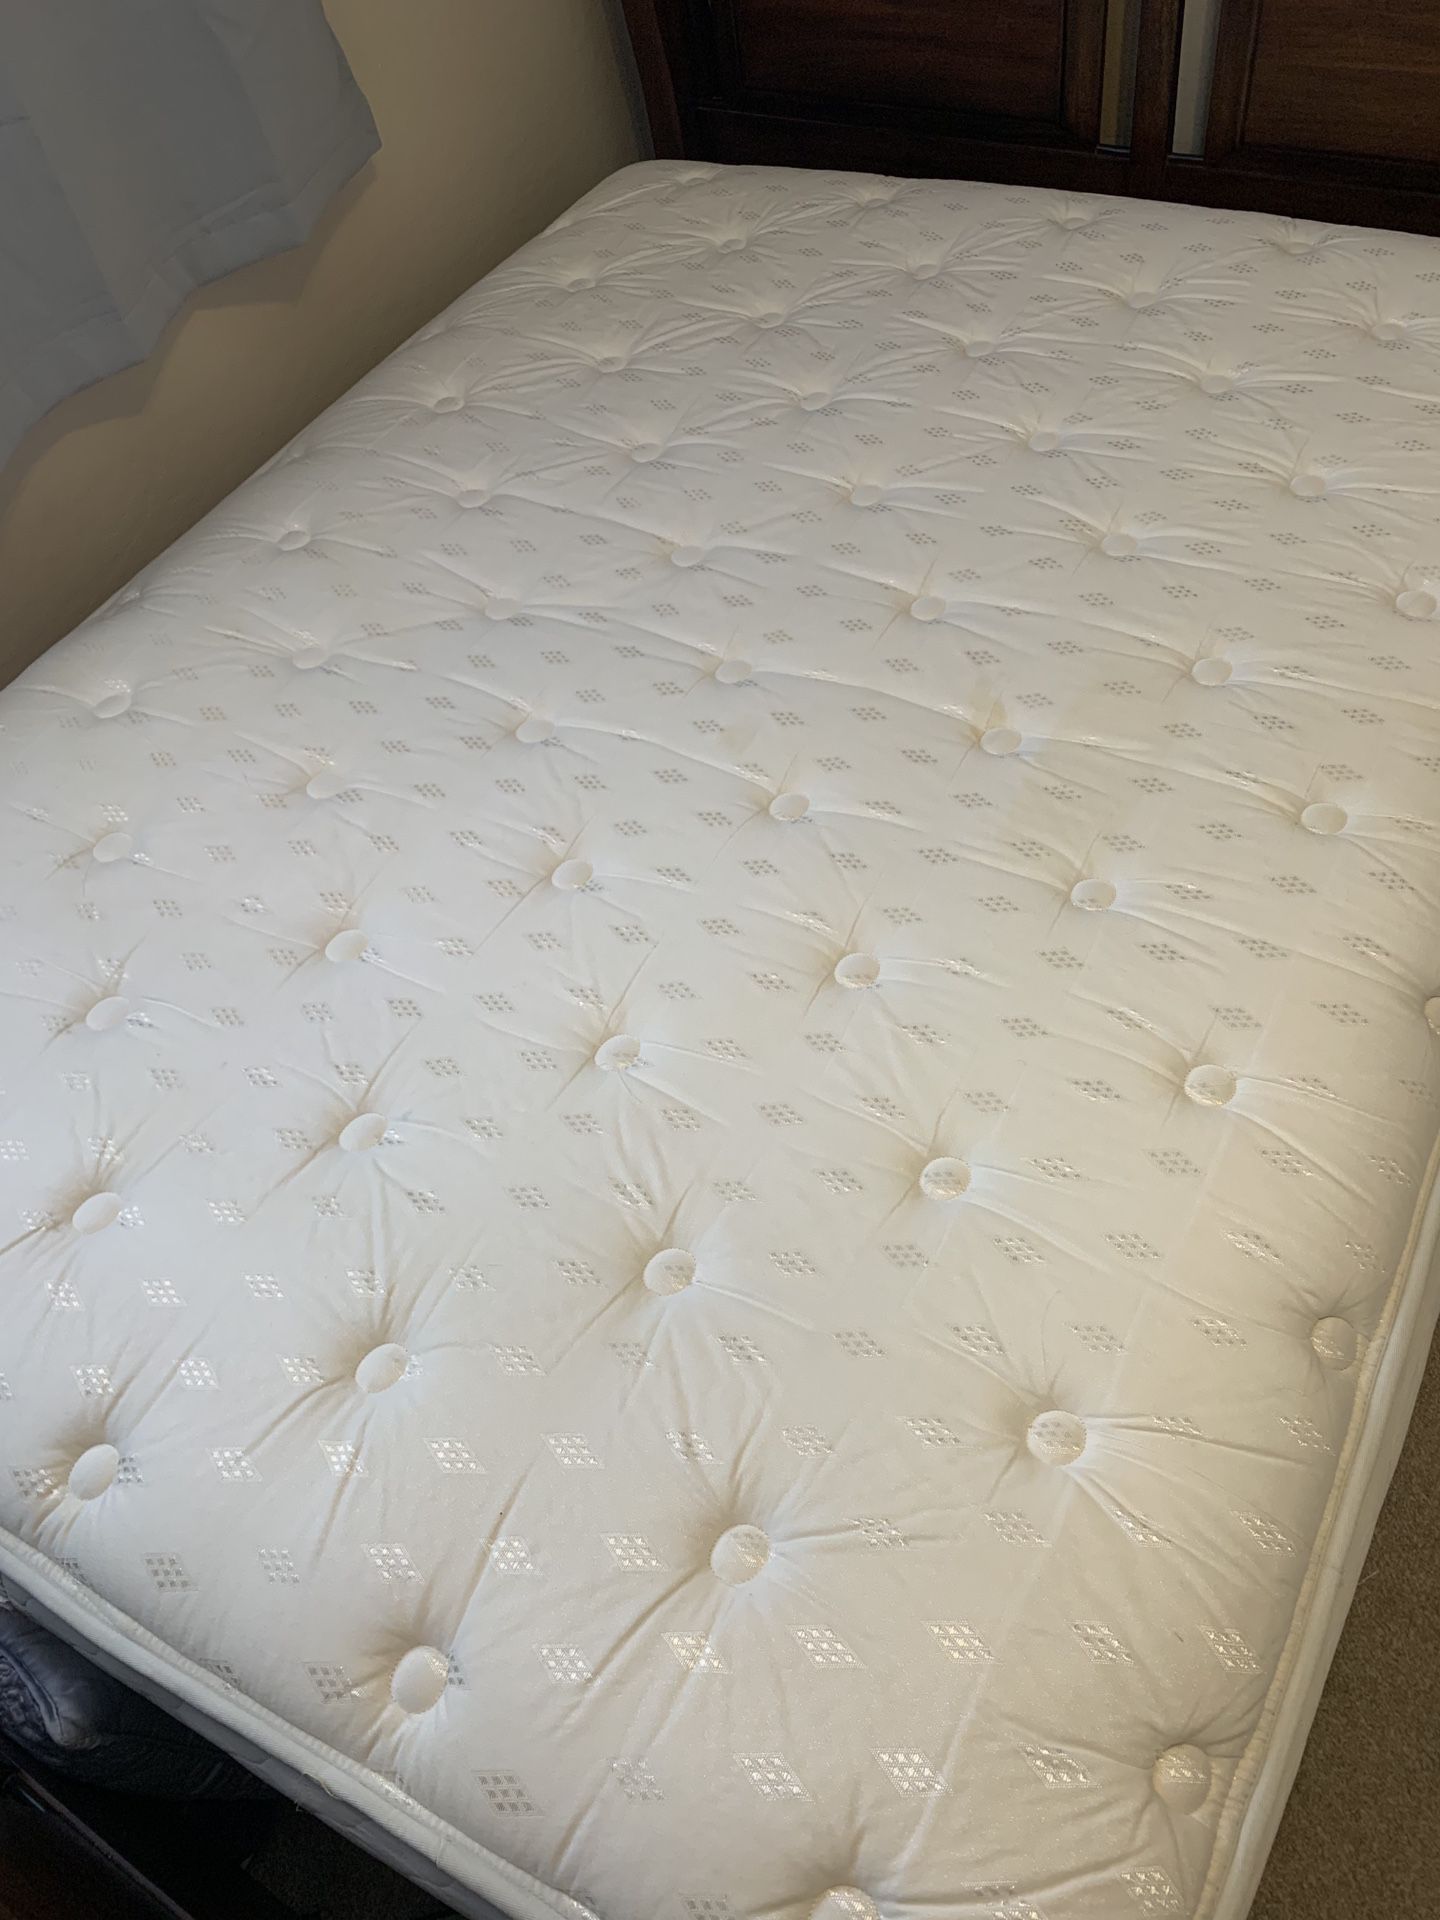 FREE - Queen size mattress & box spring (only)